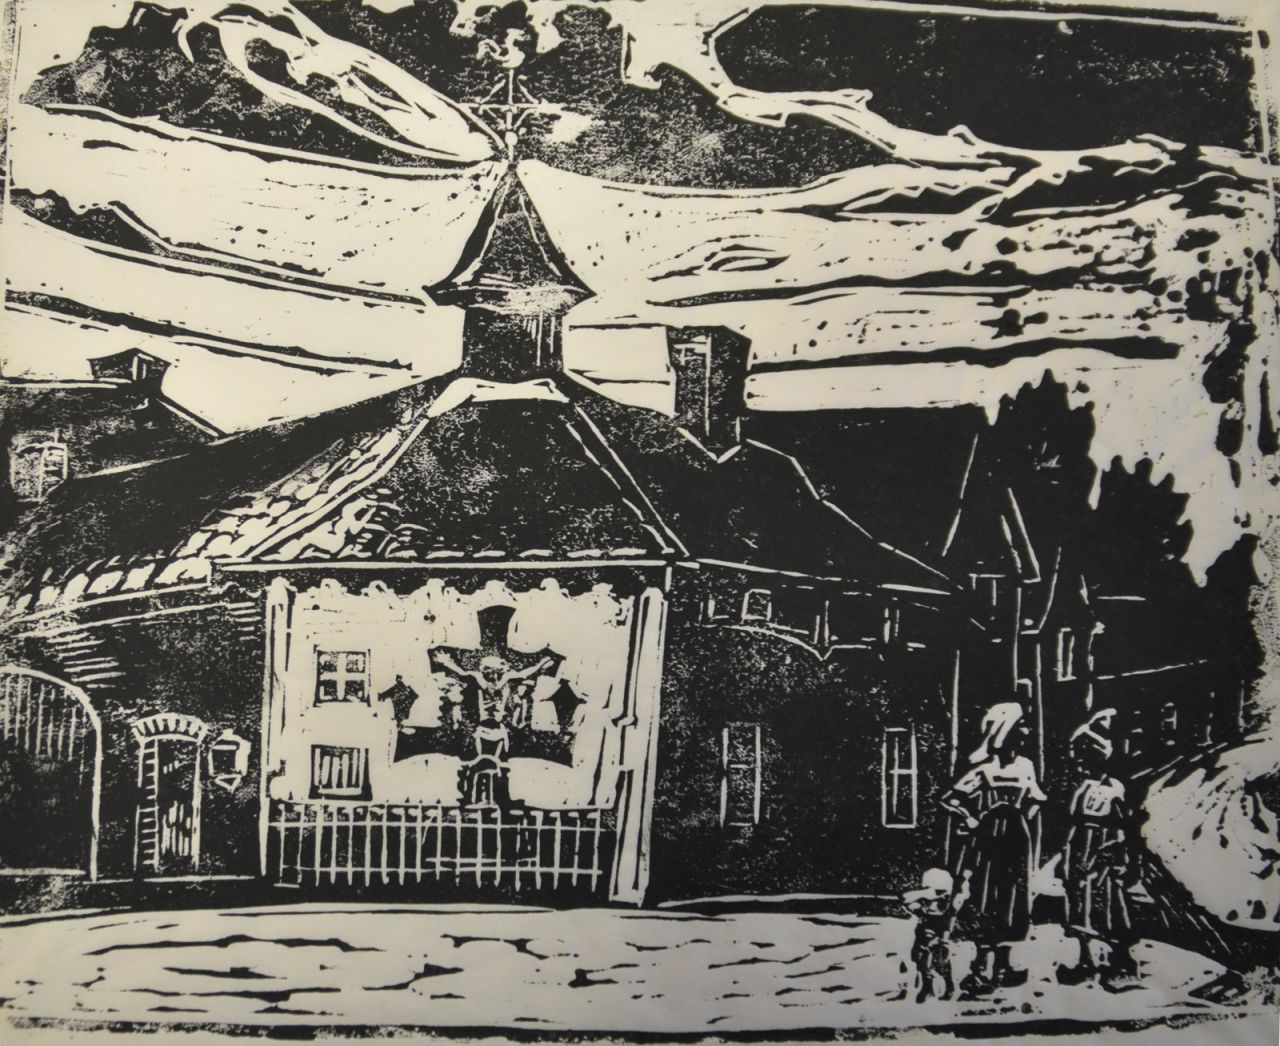 Kruyder H.J.  | 'Herman' Justus Kruyder | Prints and Multiples offered for sale | Village church with women and child, Zuid-Limburg, woodcut on Japanese paper 18.8 x 23.5 cm